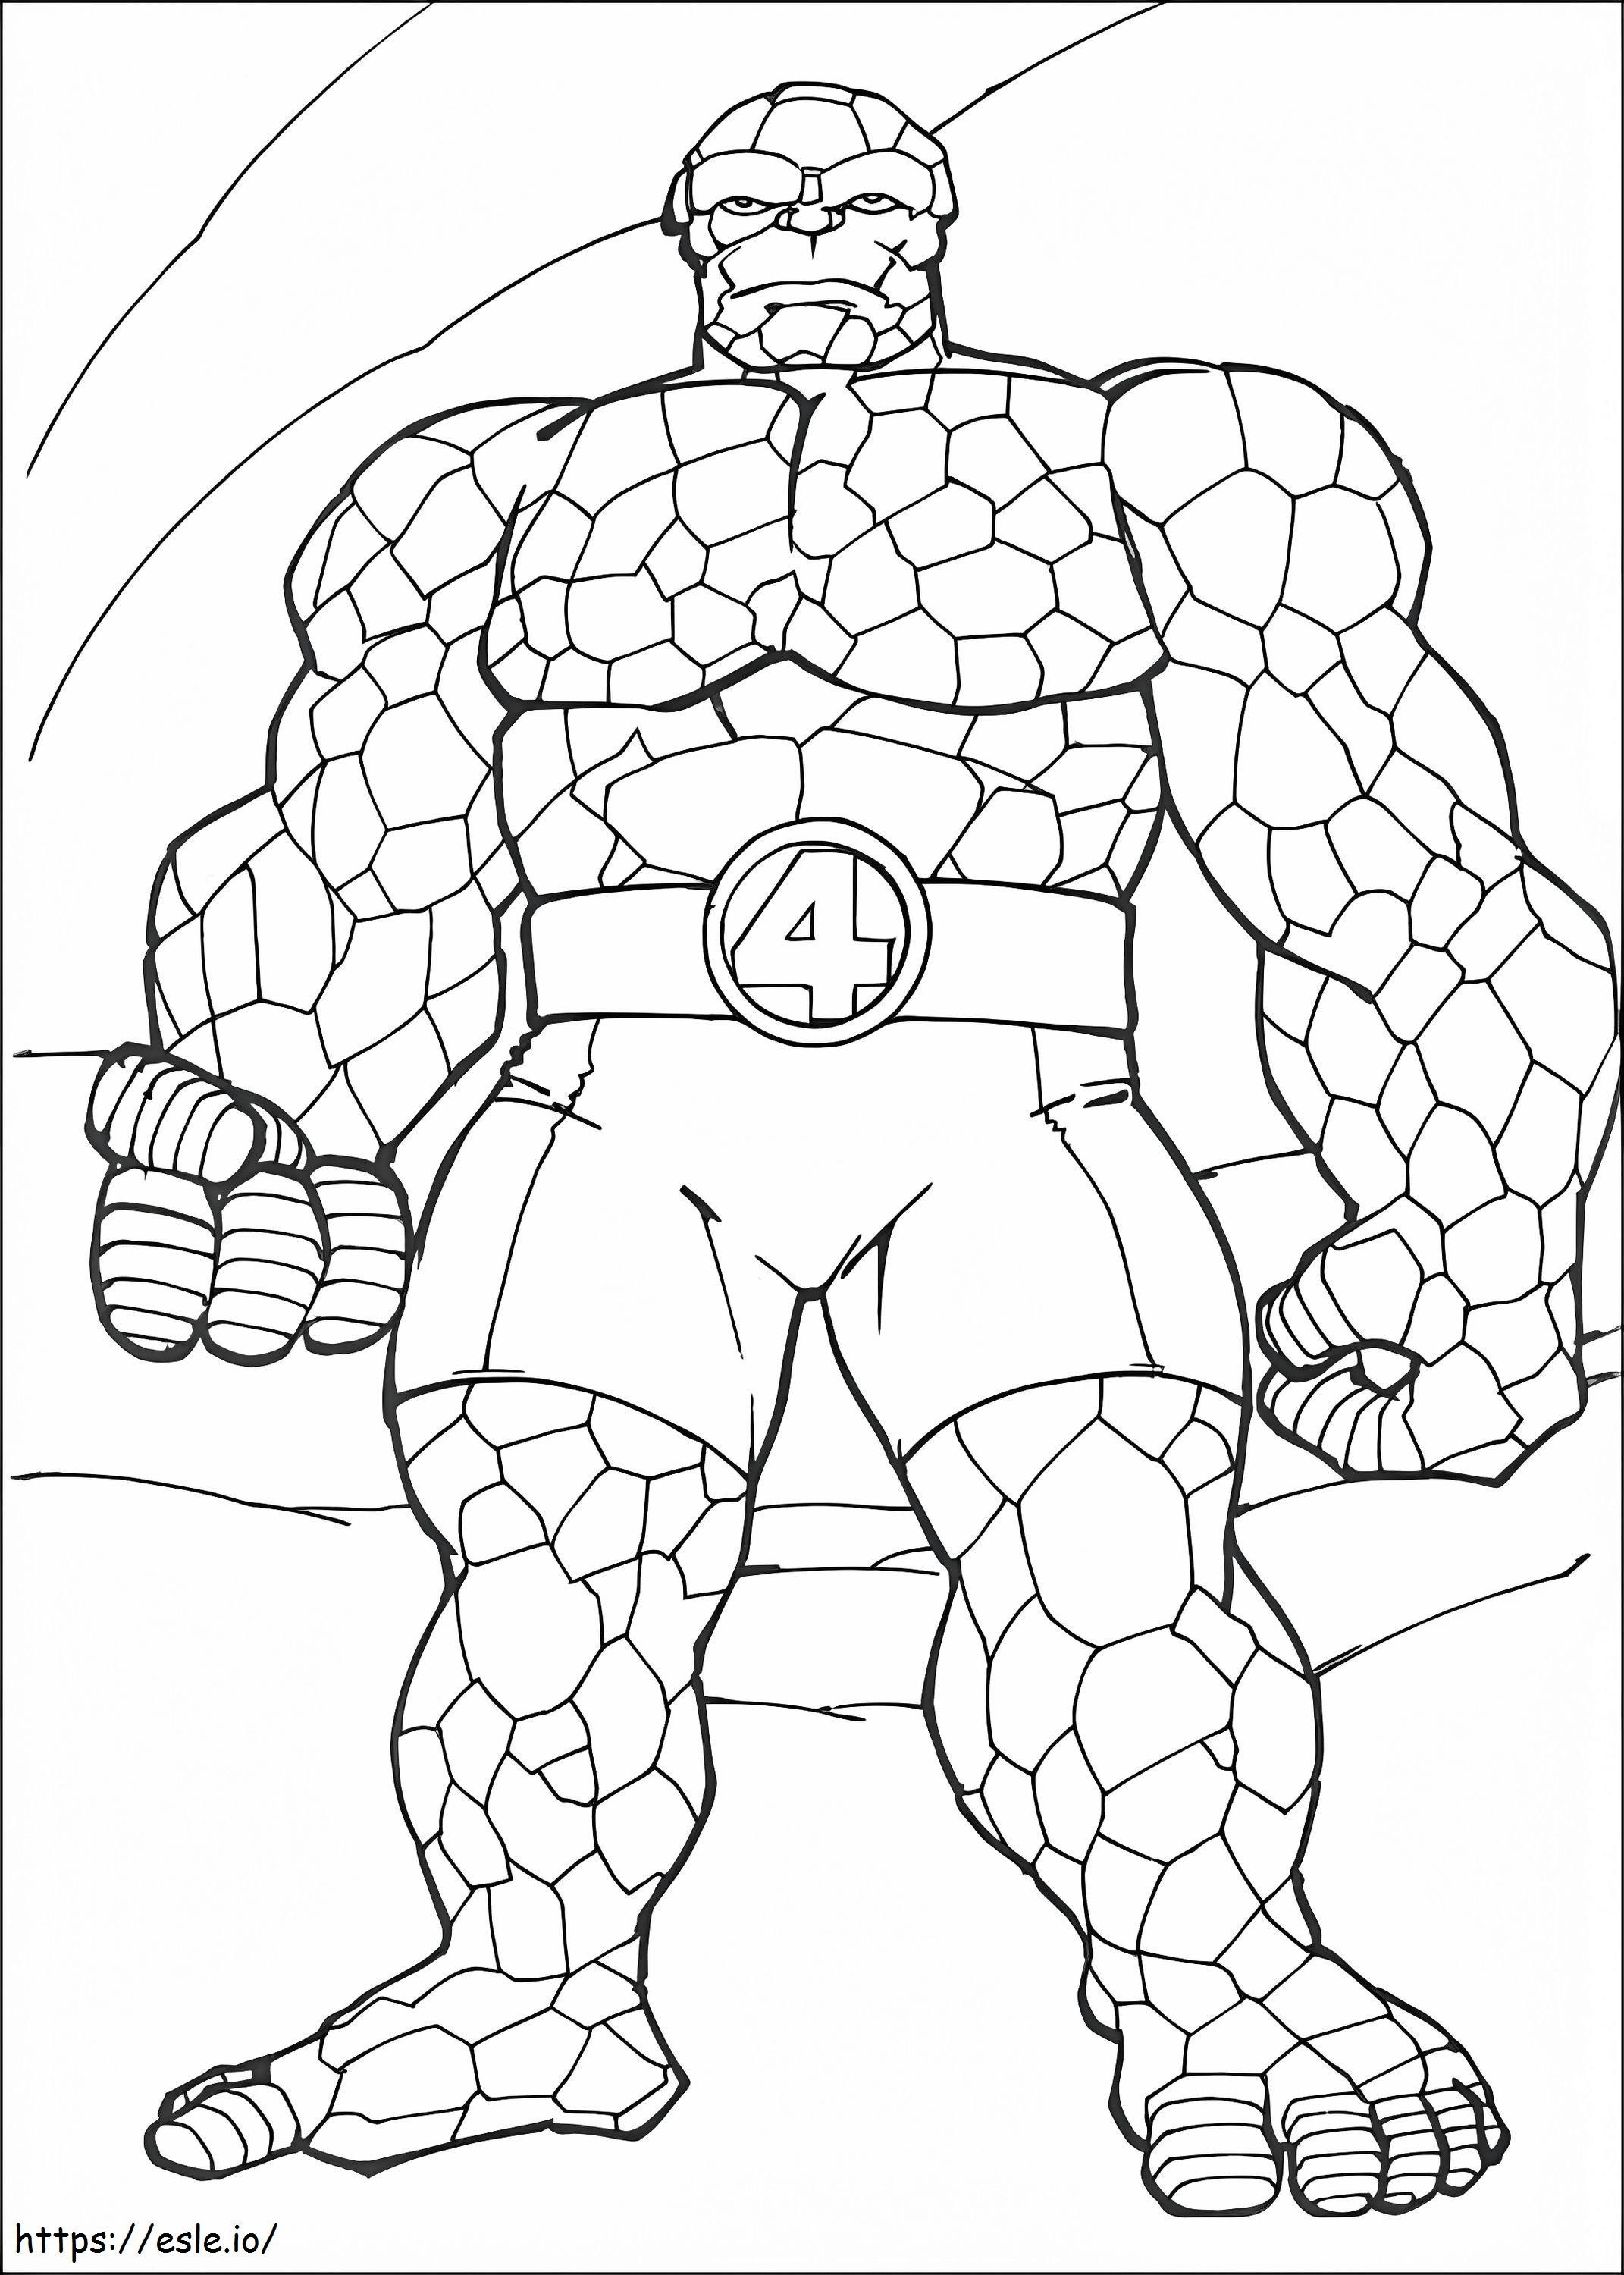 The Thing Standing coloring page